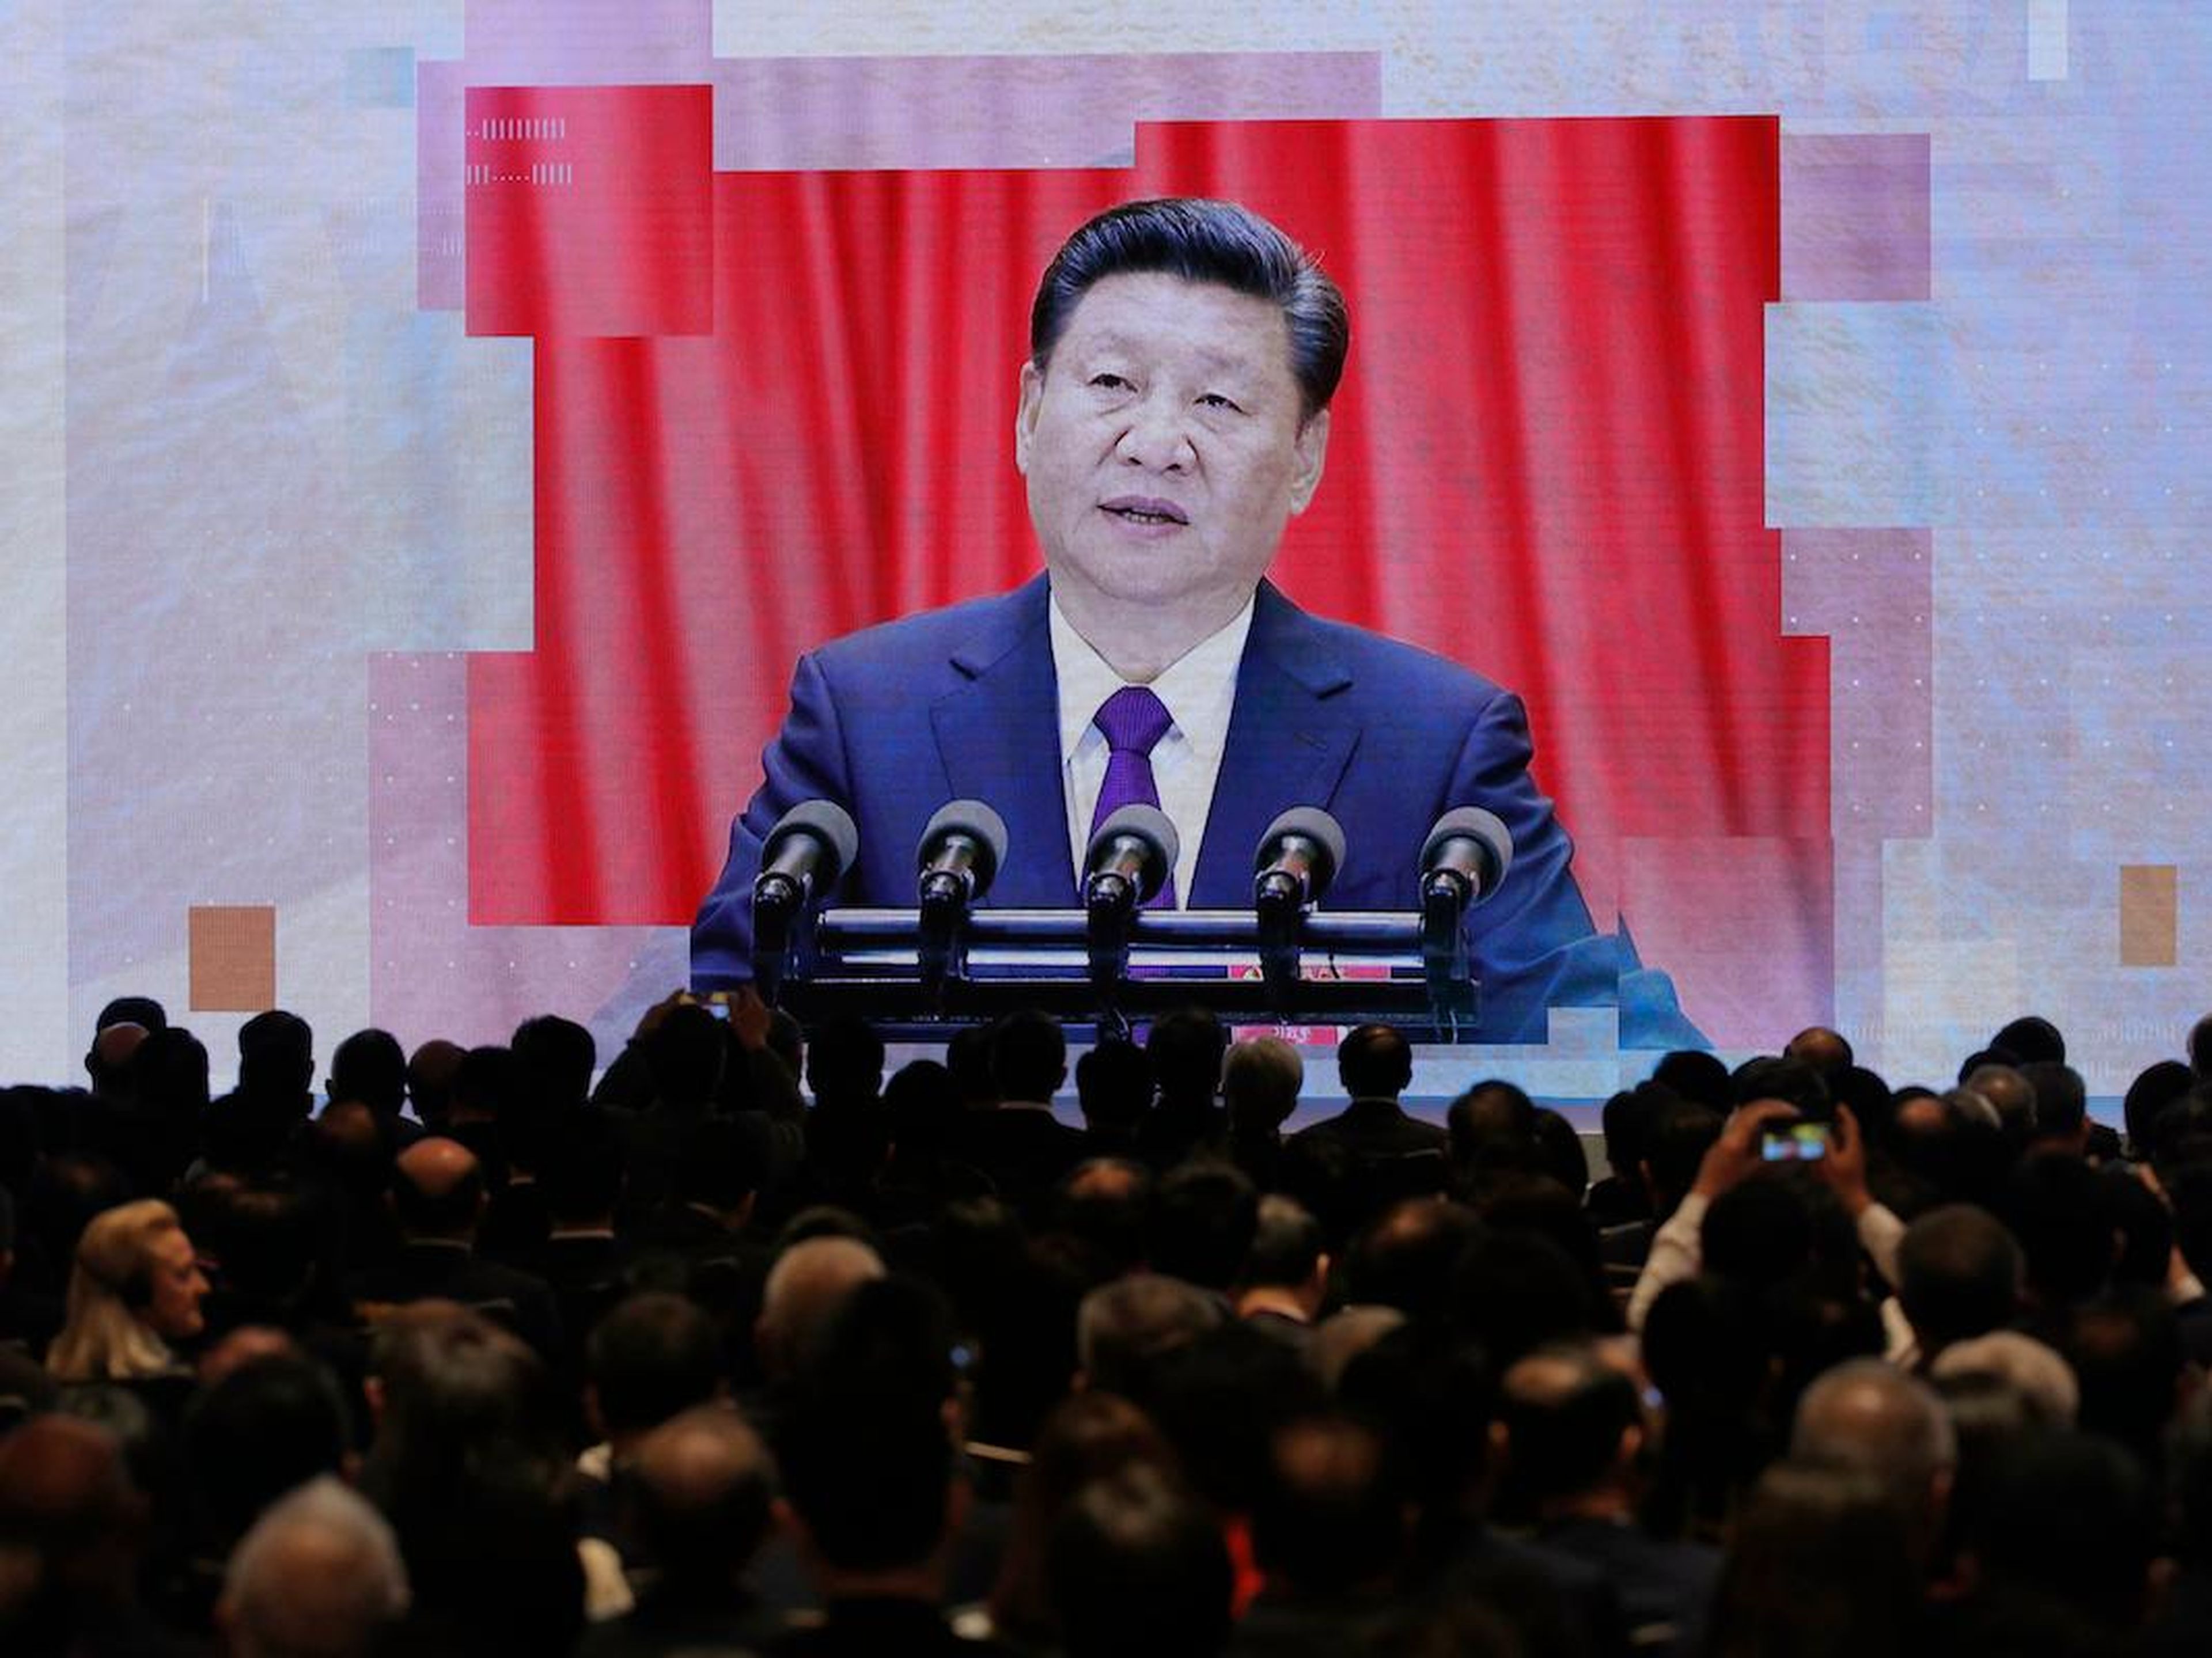 A screen shows Chinese President Xi Jinping during a symposium in Hong Kong on February 21, 2019.